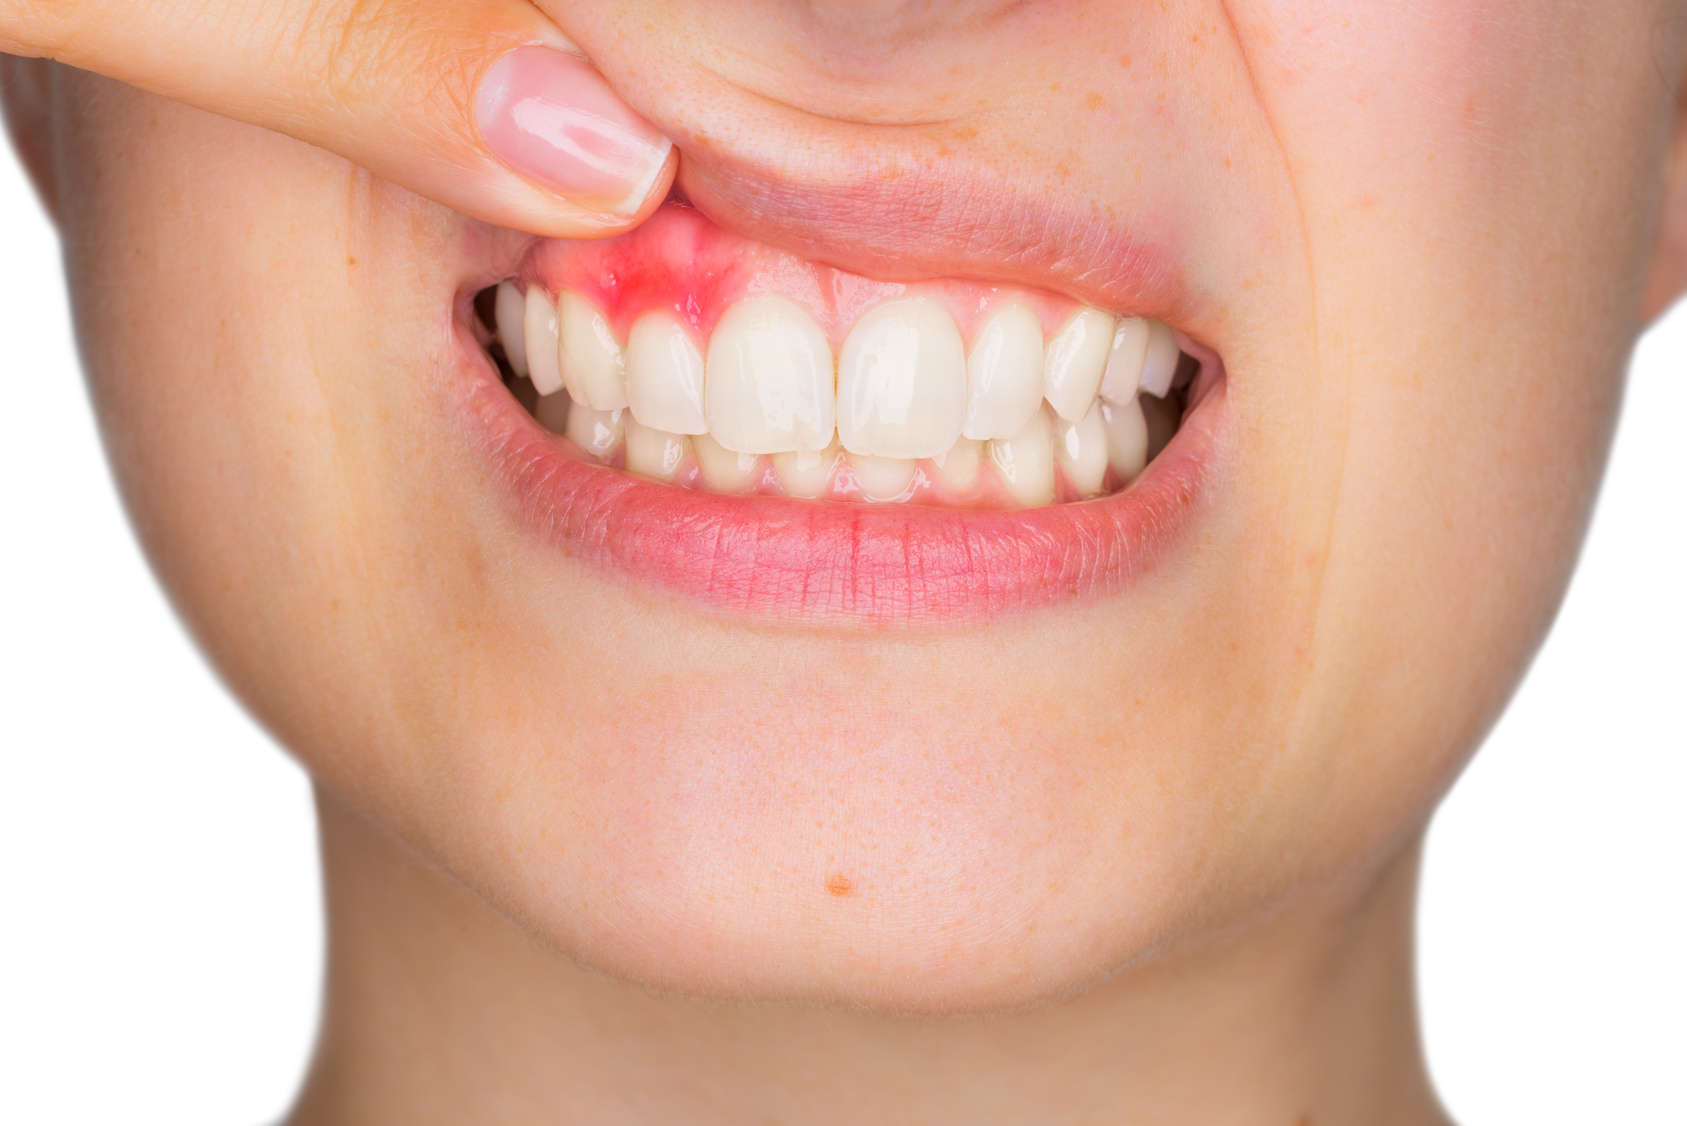 Recognizing and Treating Dental Abscesses